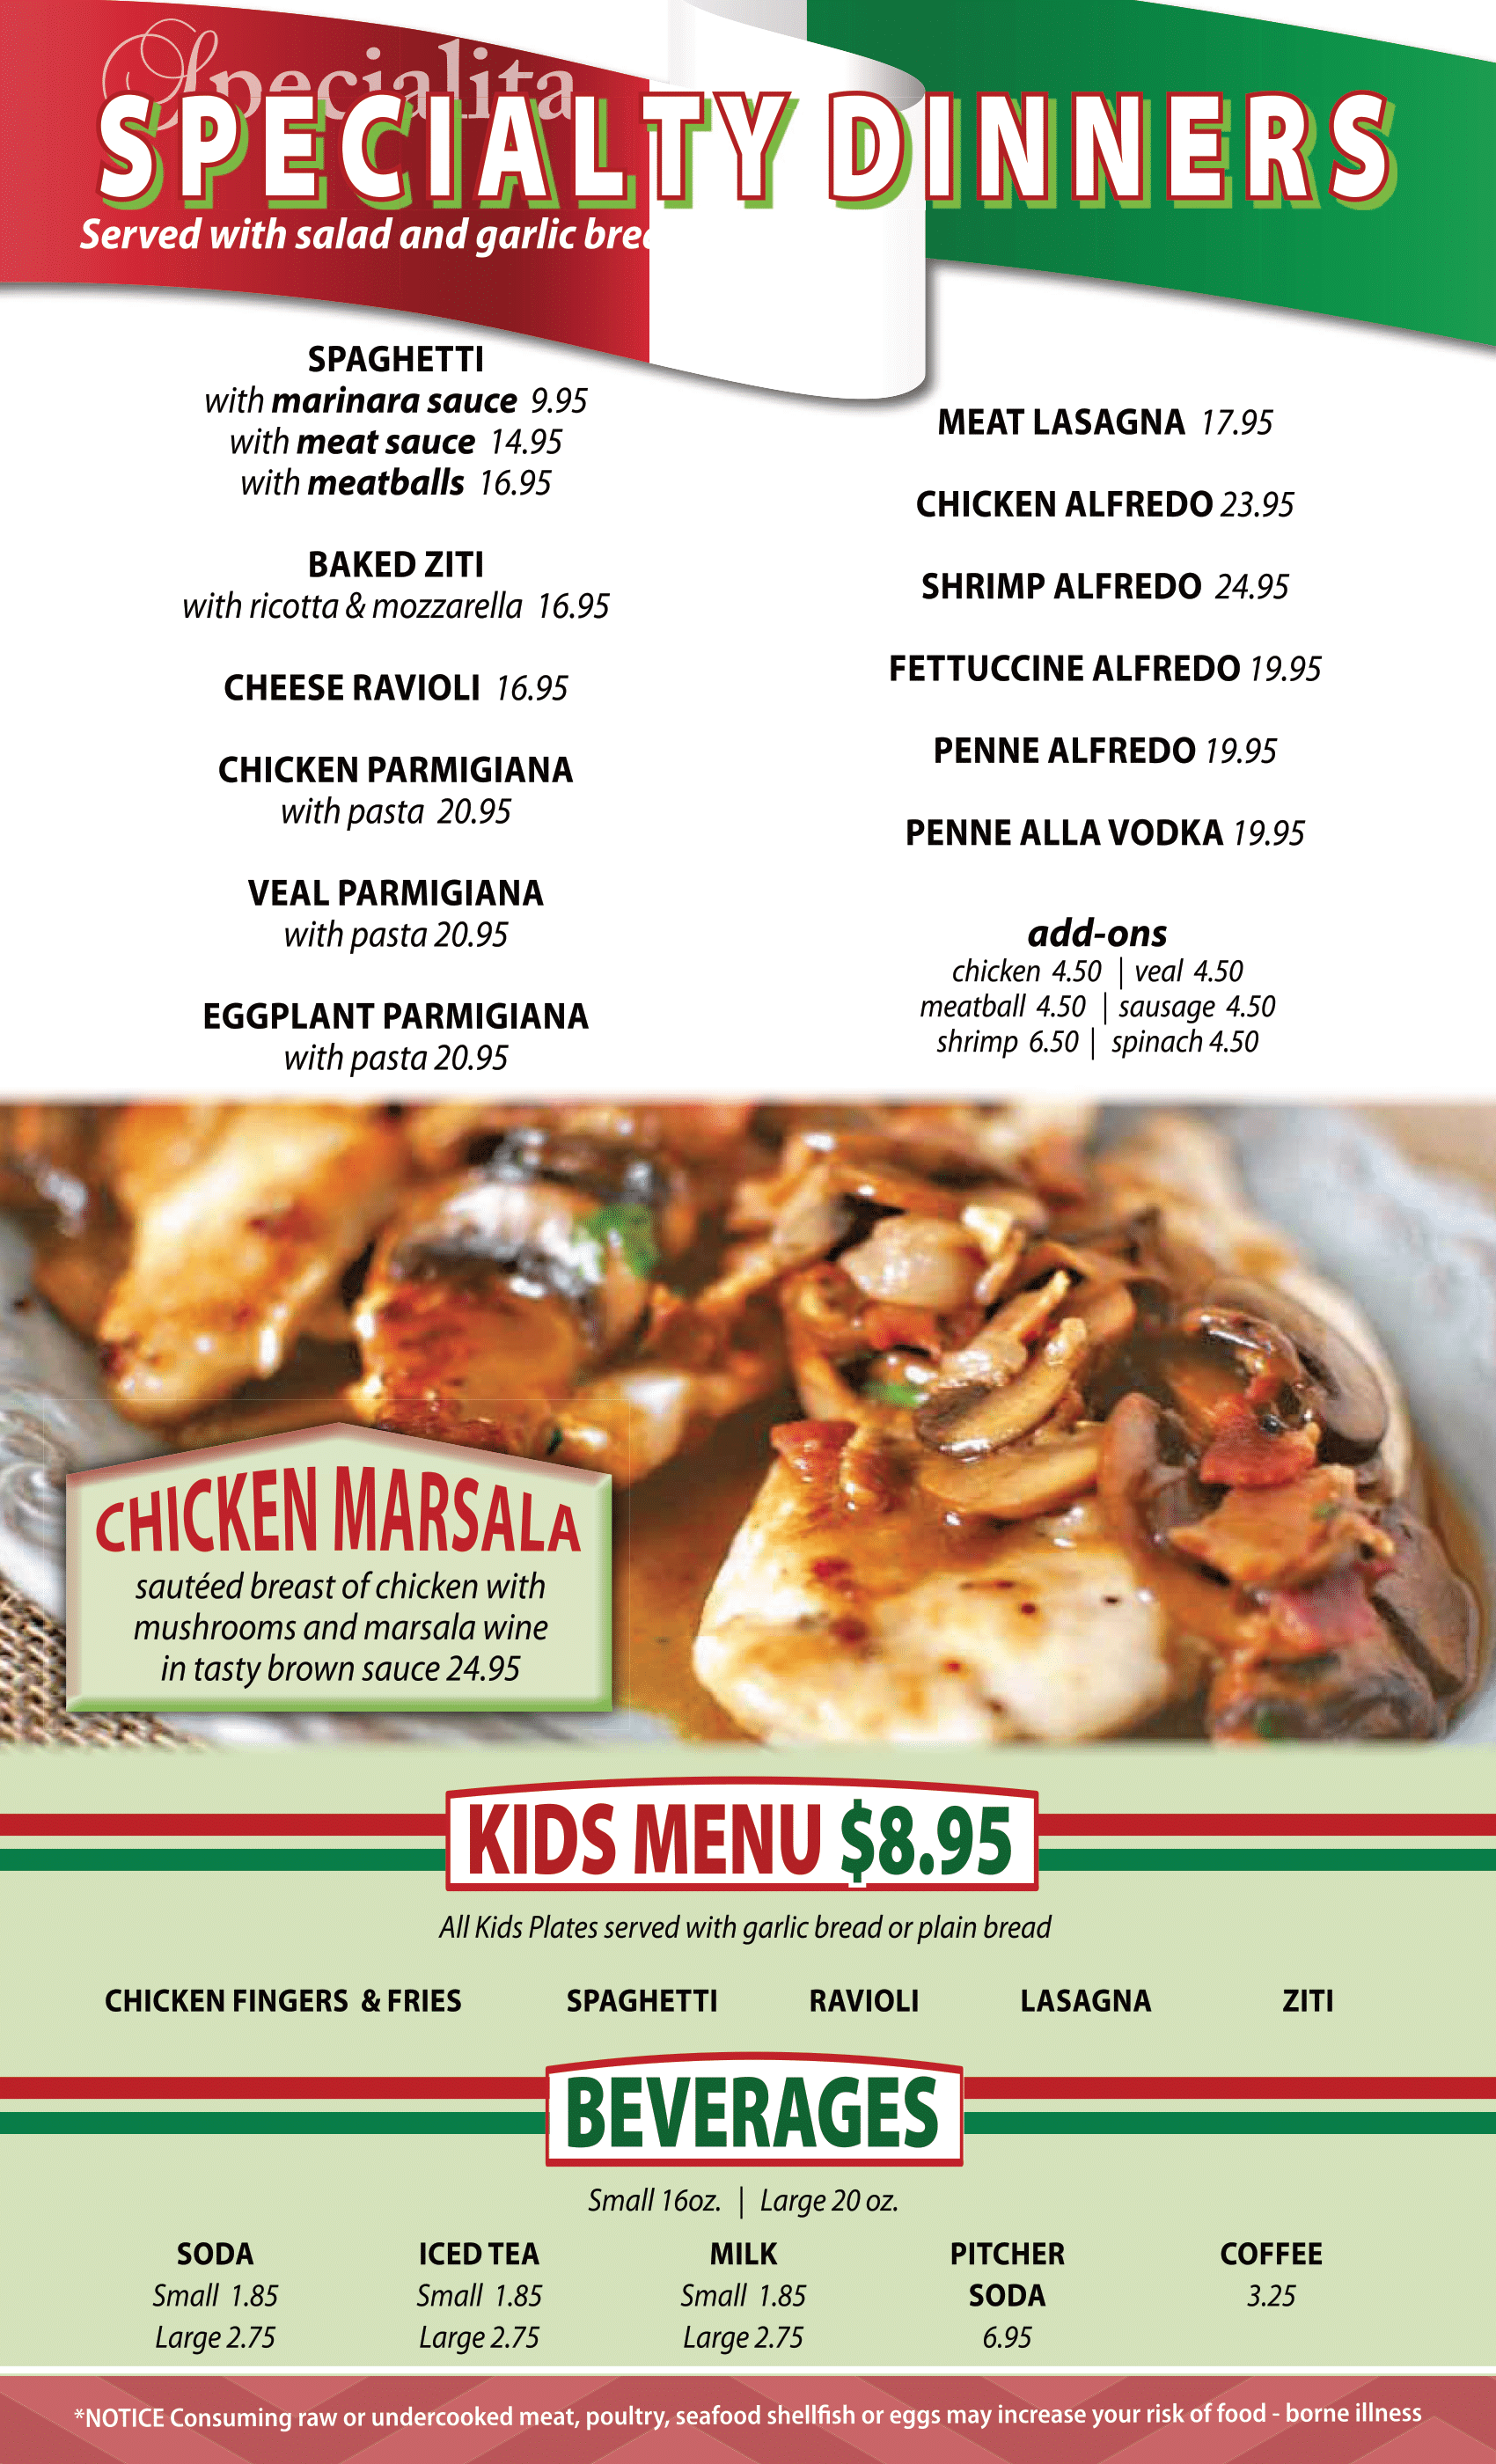 Old Mill Pizzeria - Specialty Dinners, Kids Menu, and Beverages Menu